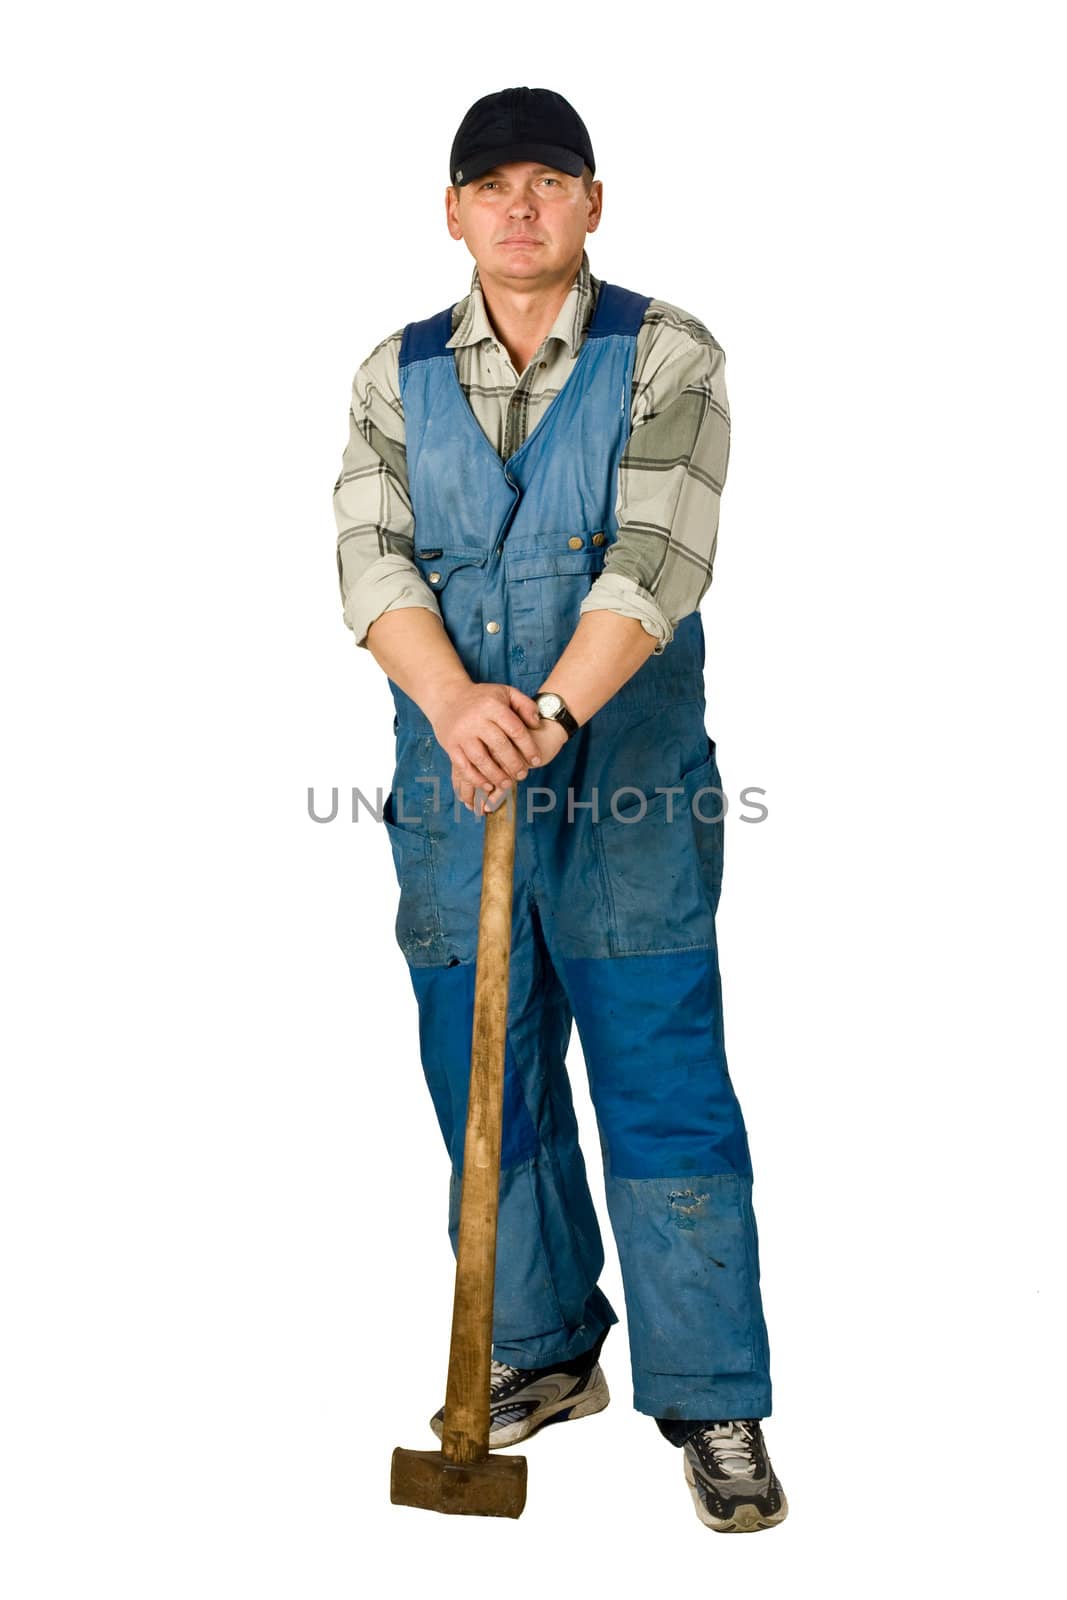 portrait of workman with sledge hammer ove4r white